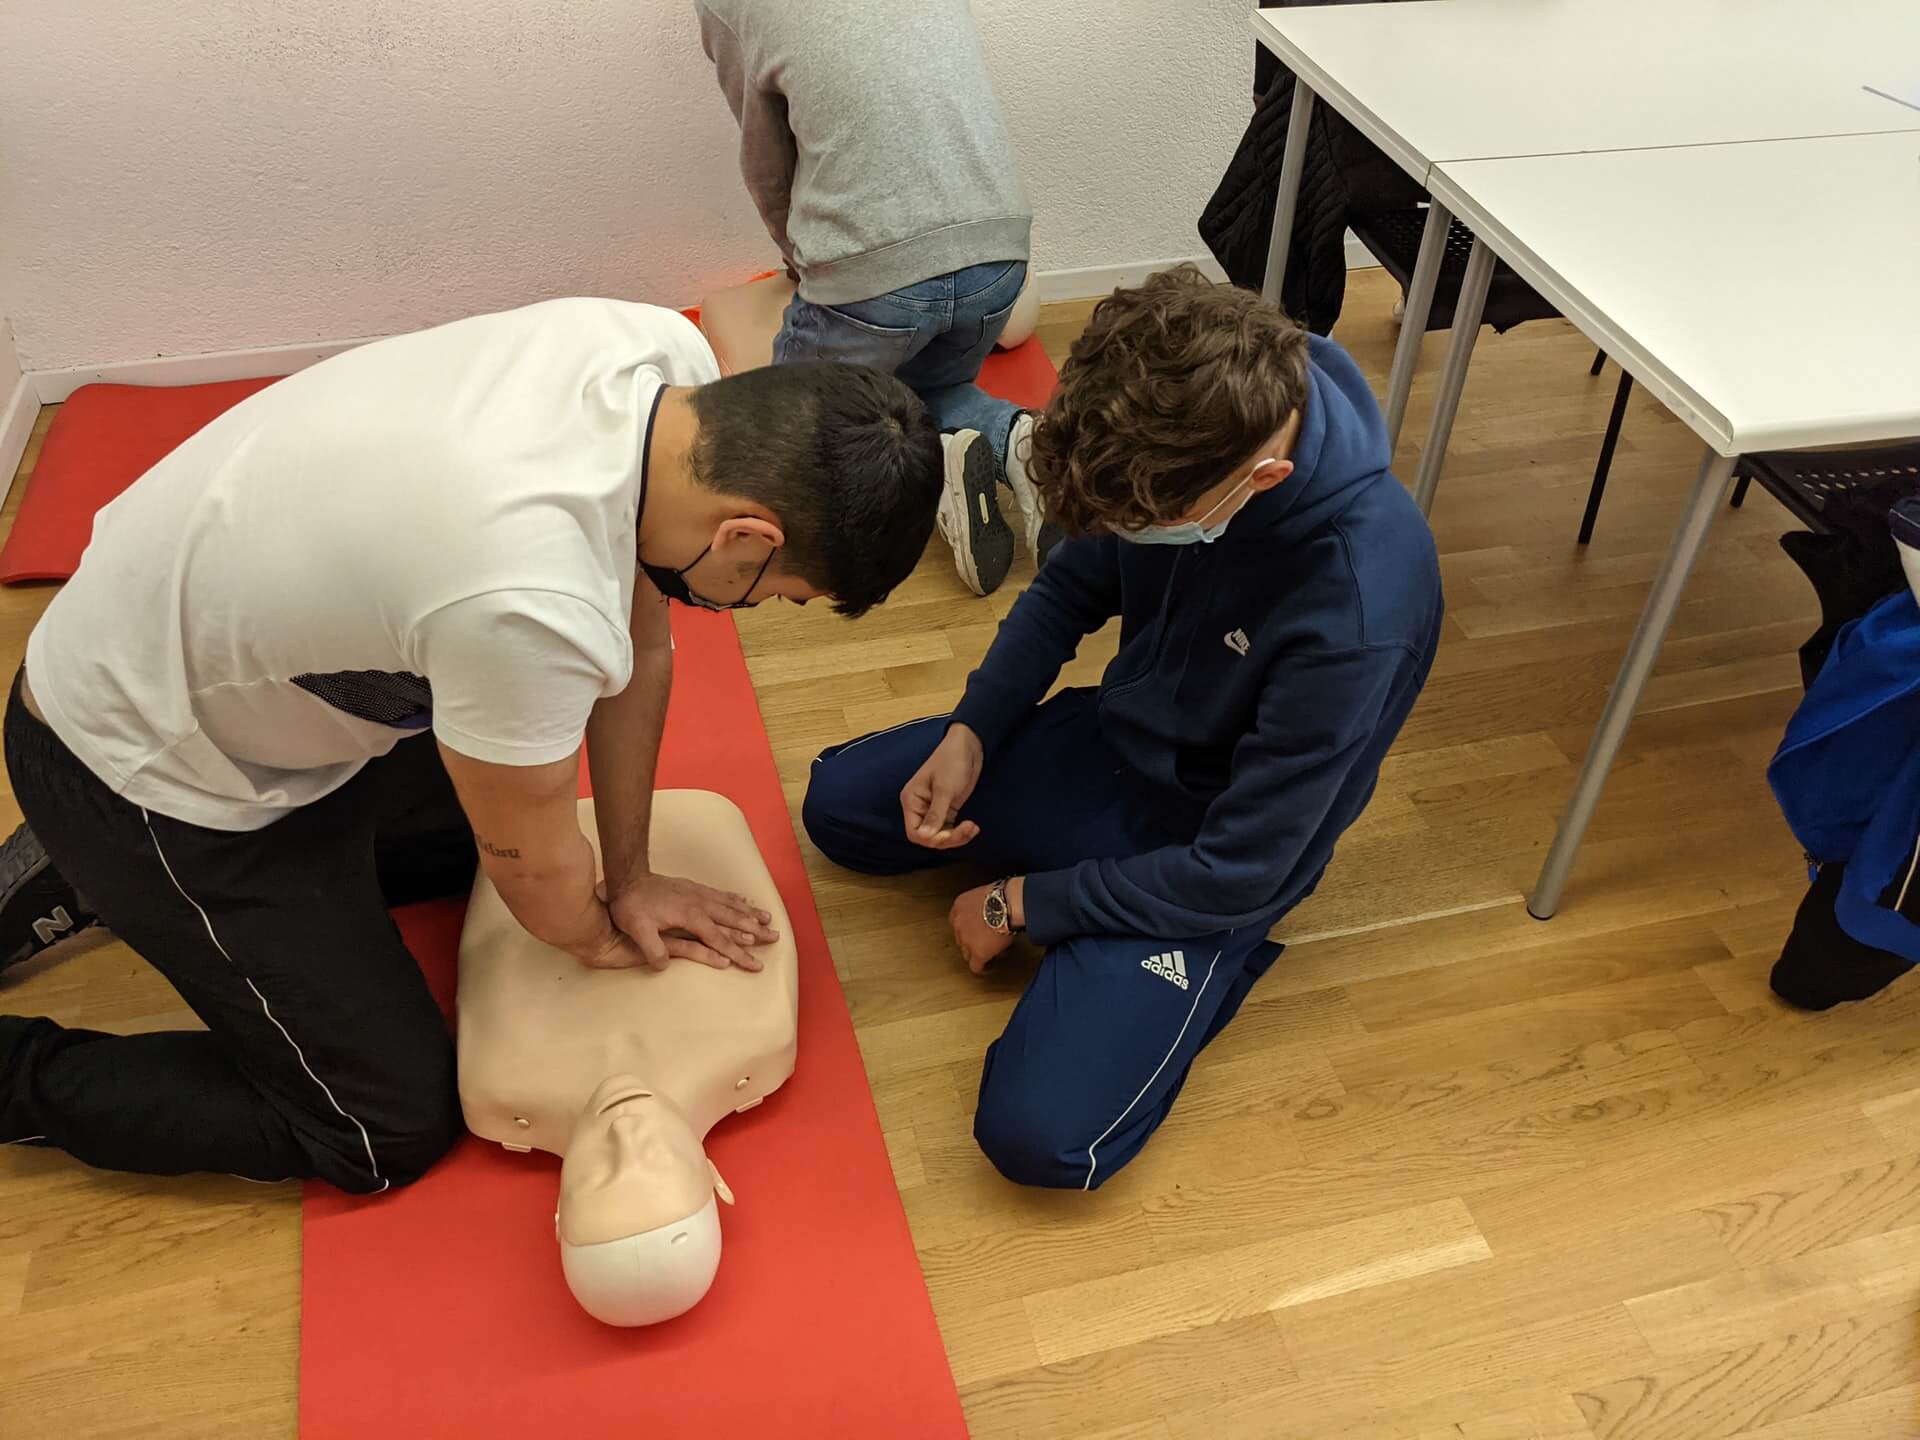 CPR Training and First Aid: Crucial Skills for Every Family